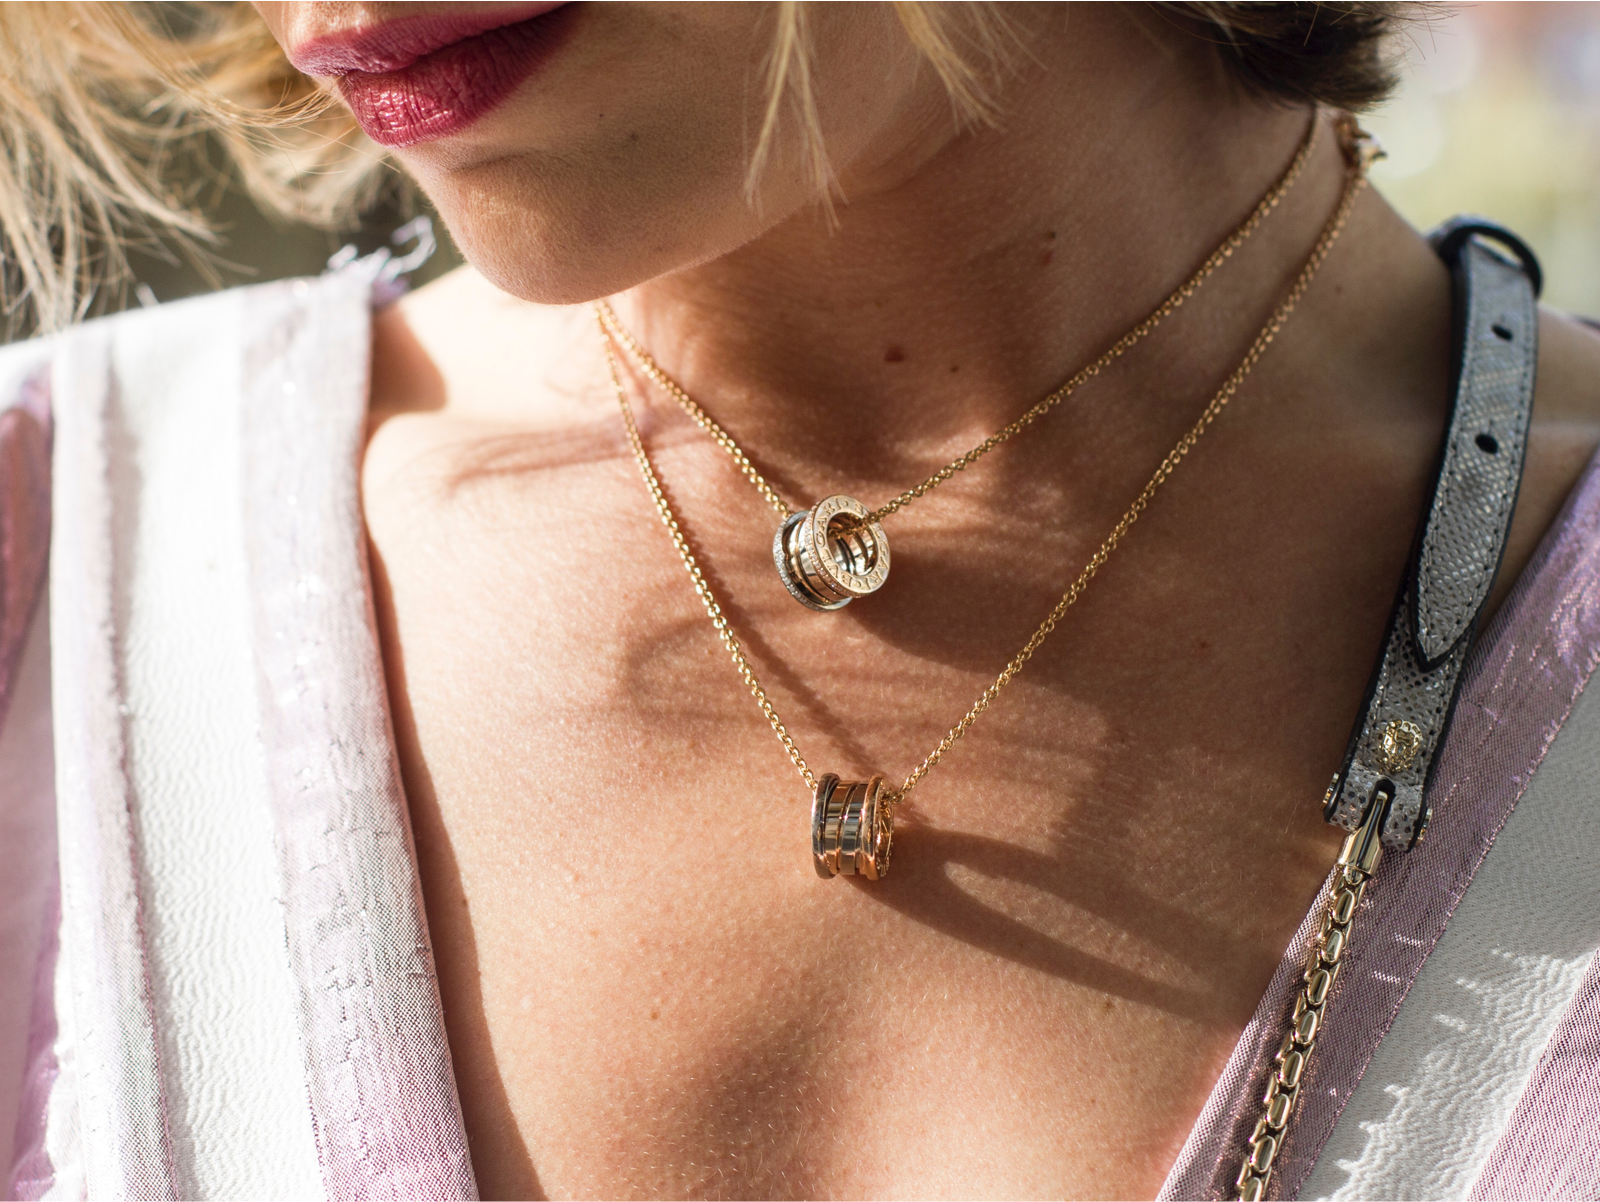 A woman's neck with 2 matching necklaces. Each necklace has a silver charm hanging on it.